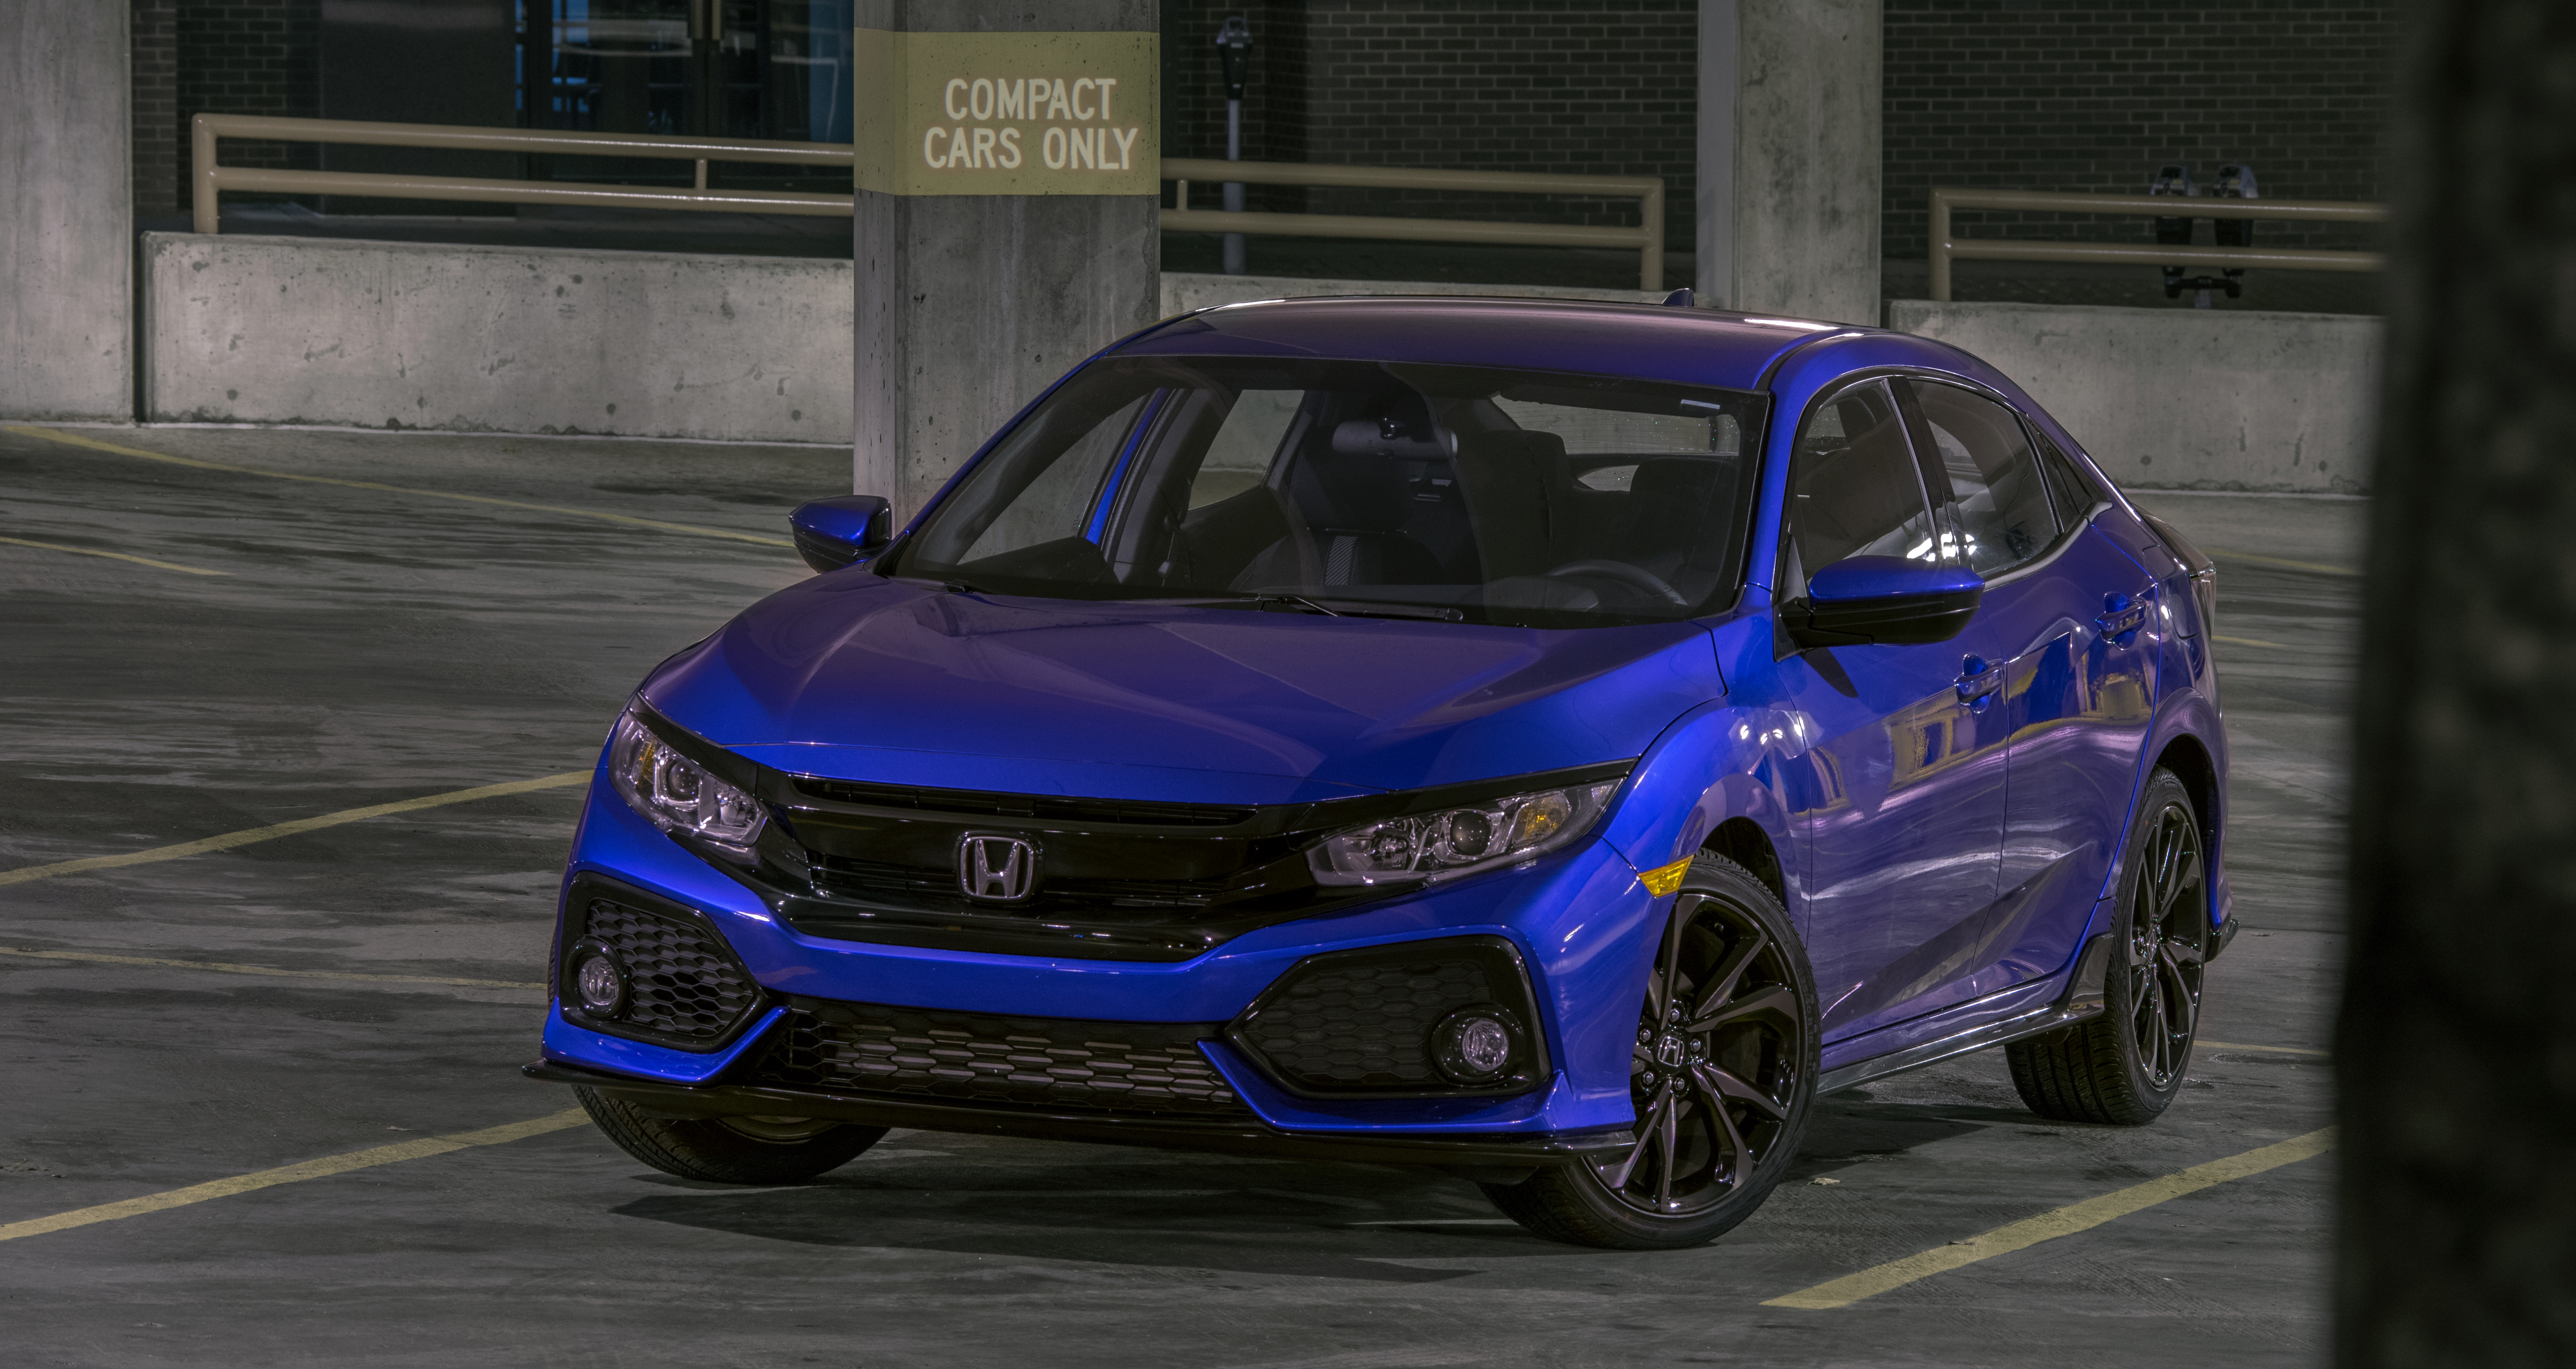 Honda Civic 10th gen Photographers! Post your civic pictures! Pic Heavy! {filename}